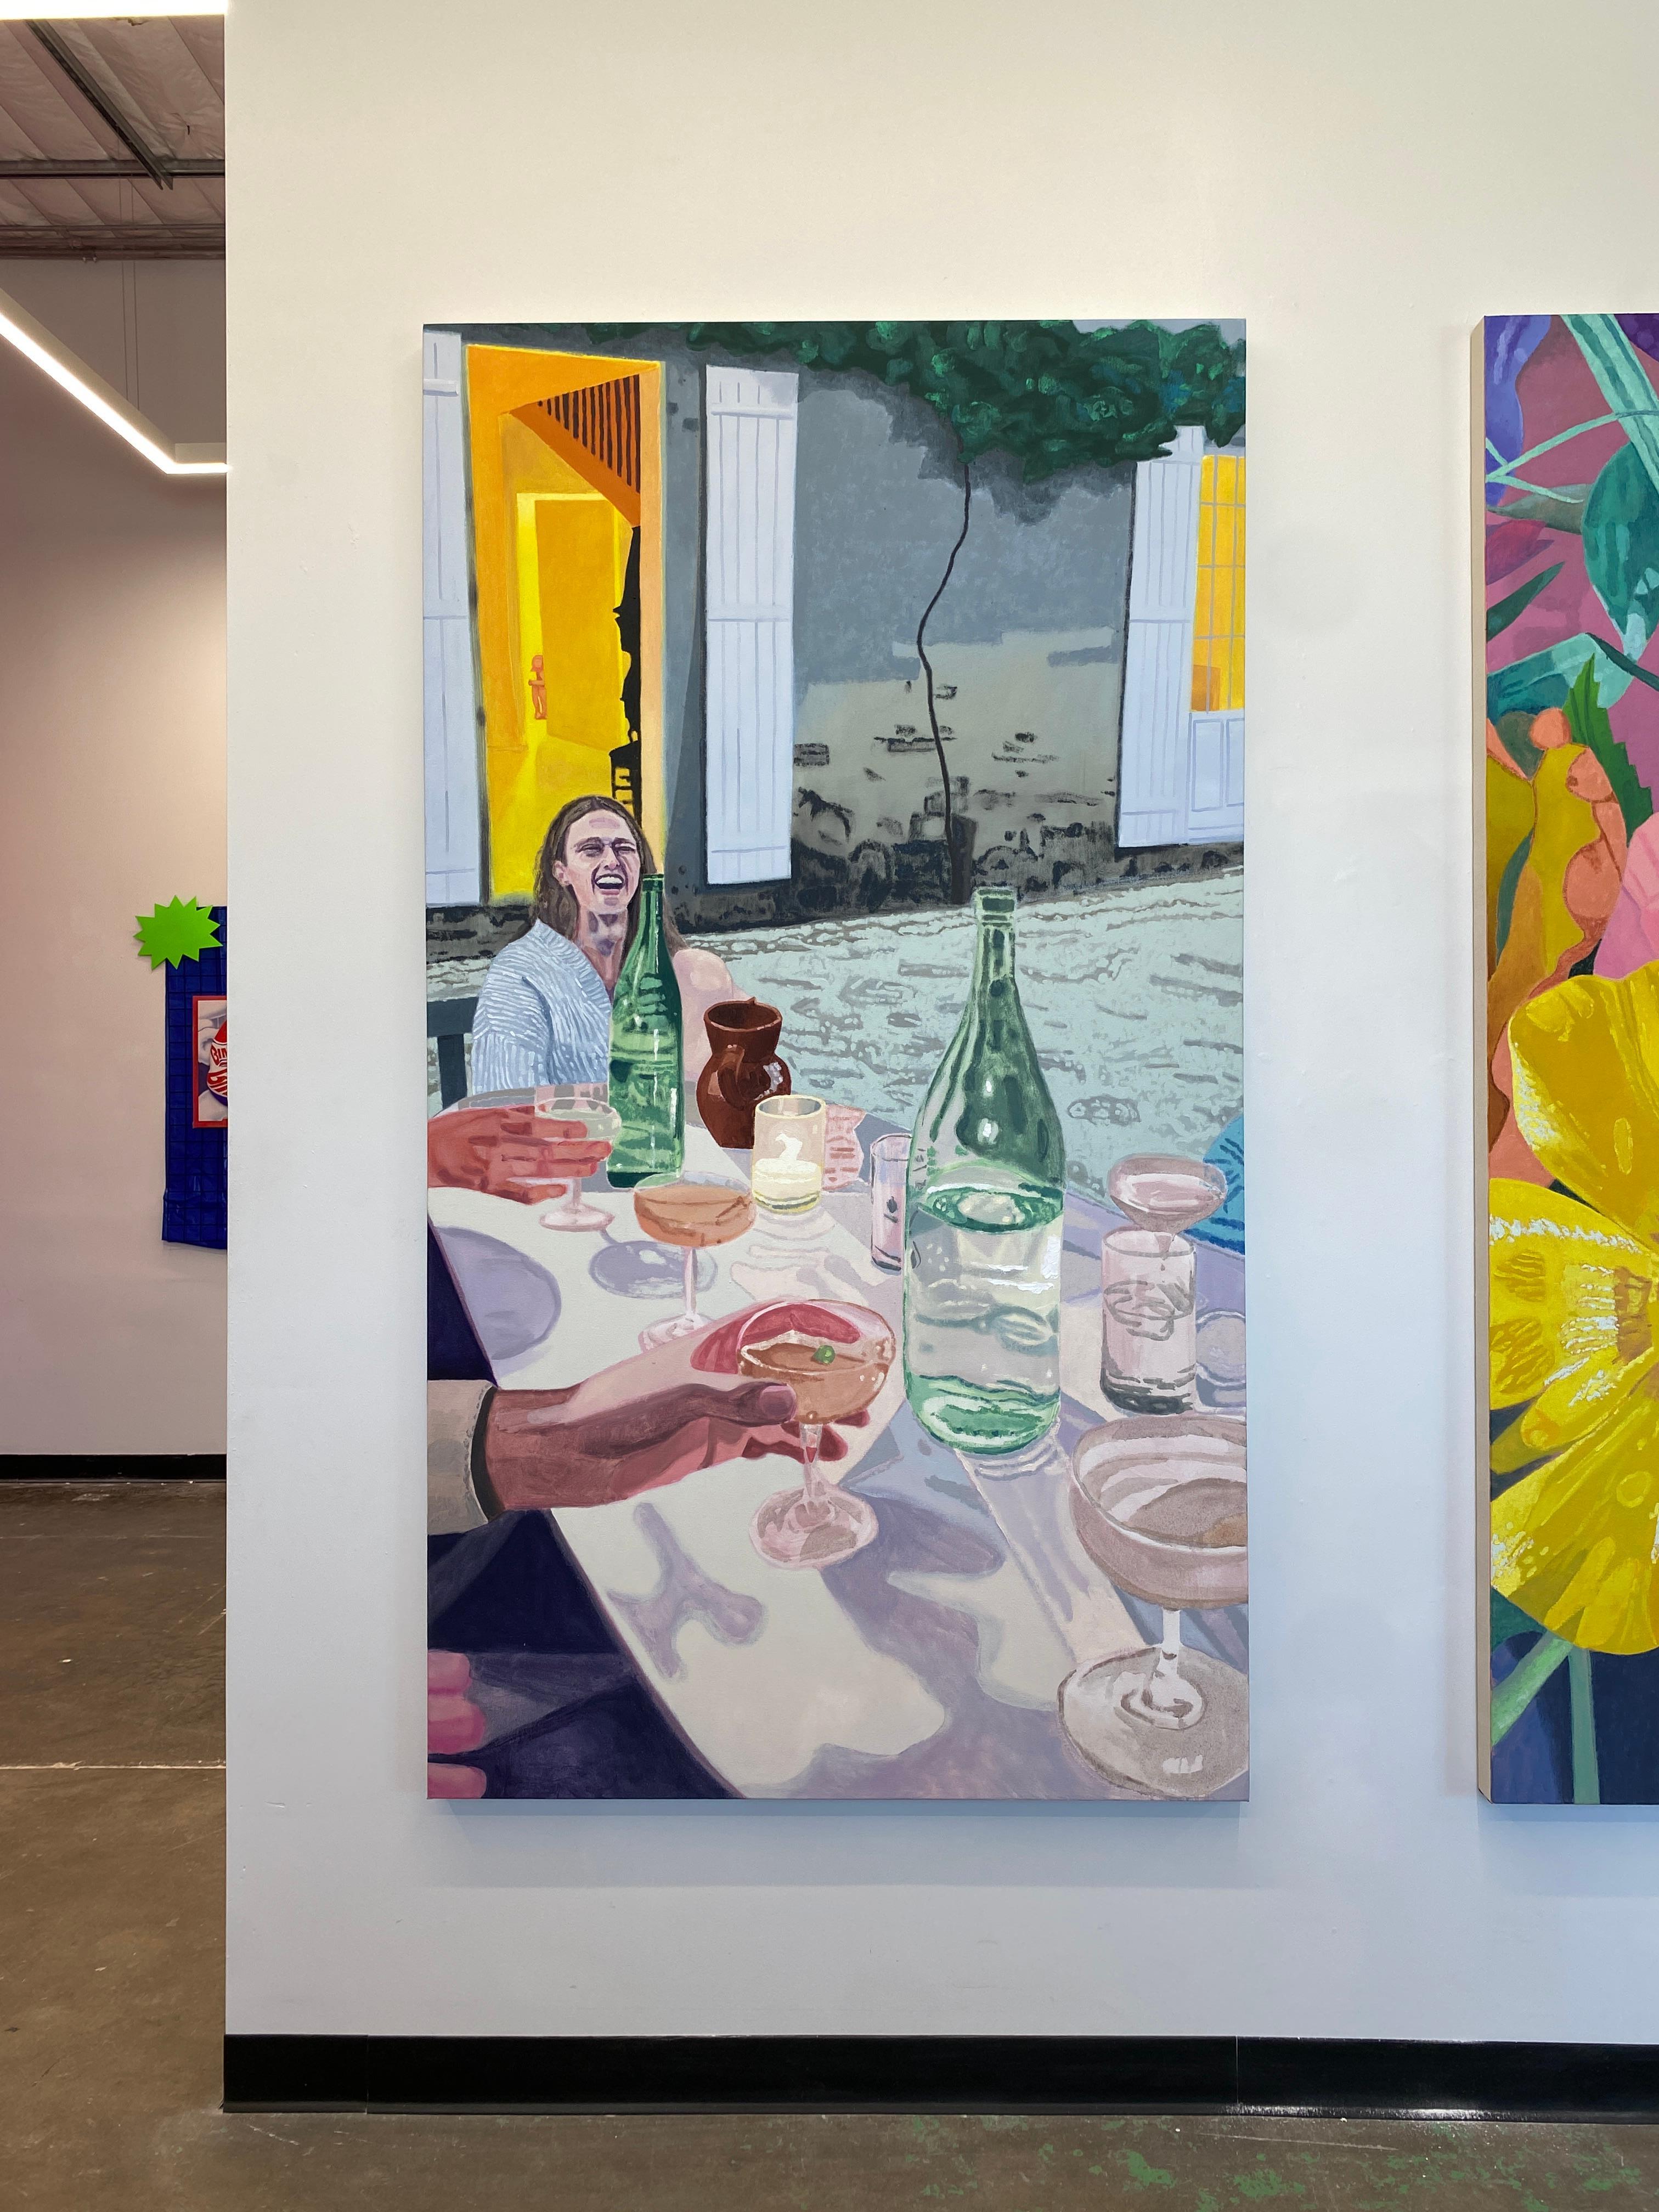 Drinks at Dusk is a featured work in Bradley Kerl's solo exhibition, To Speak Through Flowers, at Ivester Contemporary. 

“To speak through flowers” is a German idiom that means to communicate in a roundabout way through symbols, codes or figures of